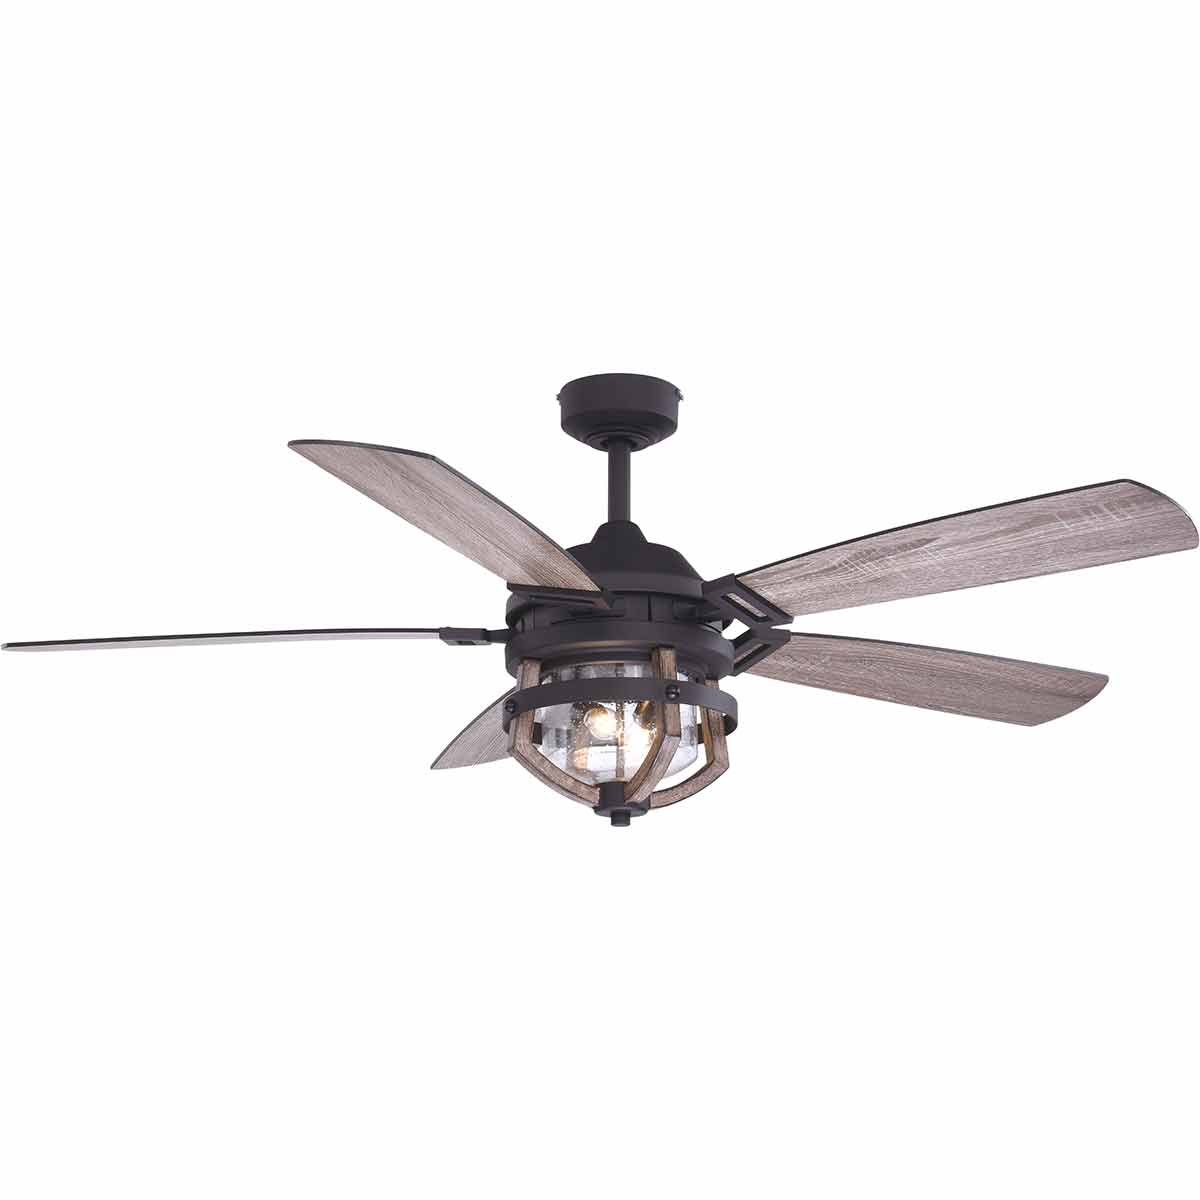 A black ceiling fan with wooden blades.